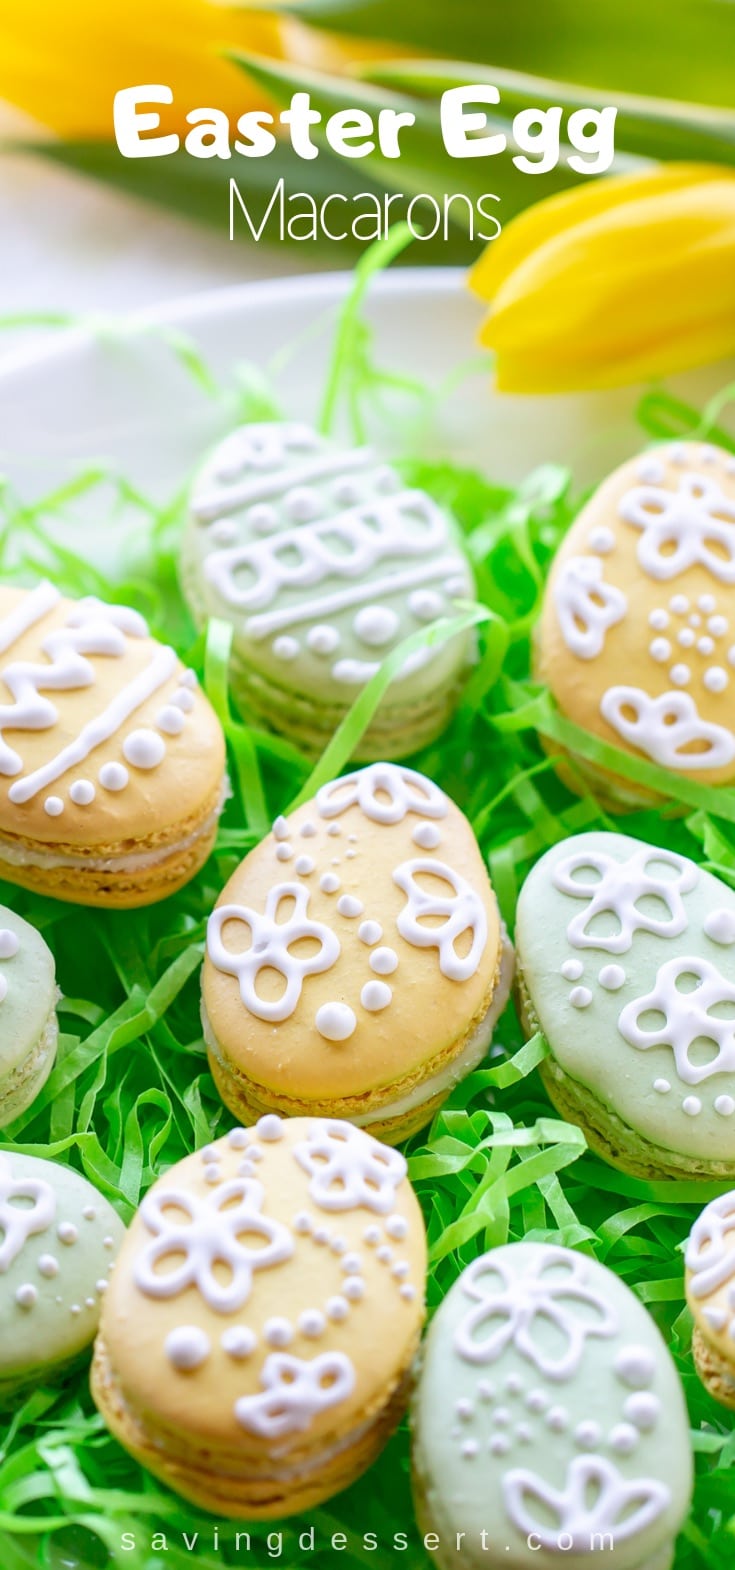 Easter Egg Macarons with White Chocolate-Mint Ganache #easter #macarons #eastereggmacarons #eastereggcookies #cookies #meringuecookie #macaron #holiday #decoratedmacarons